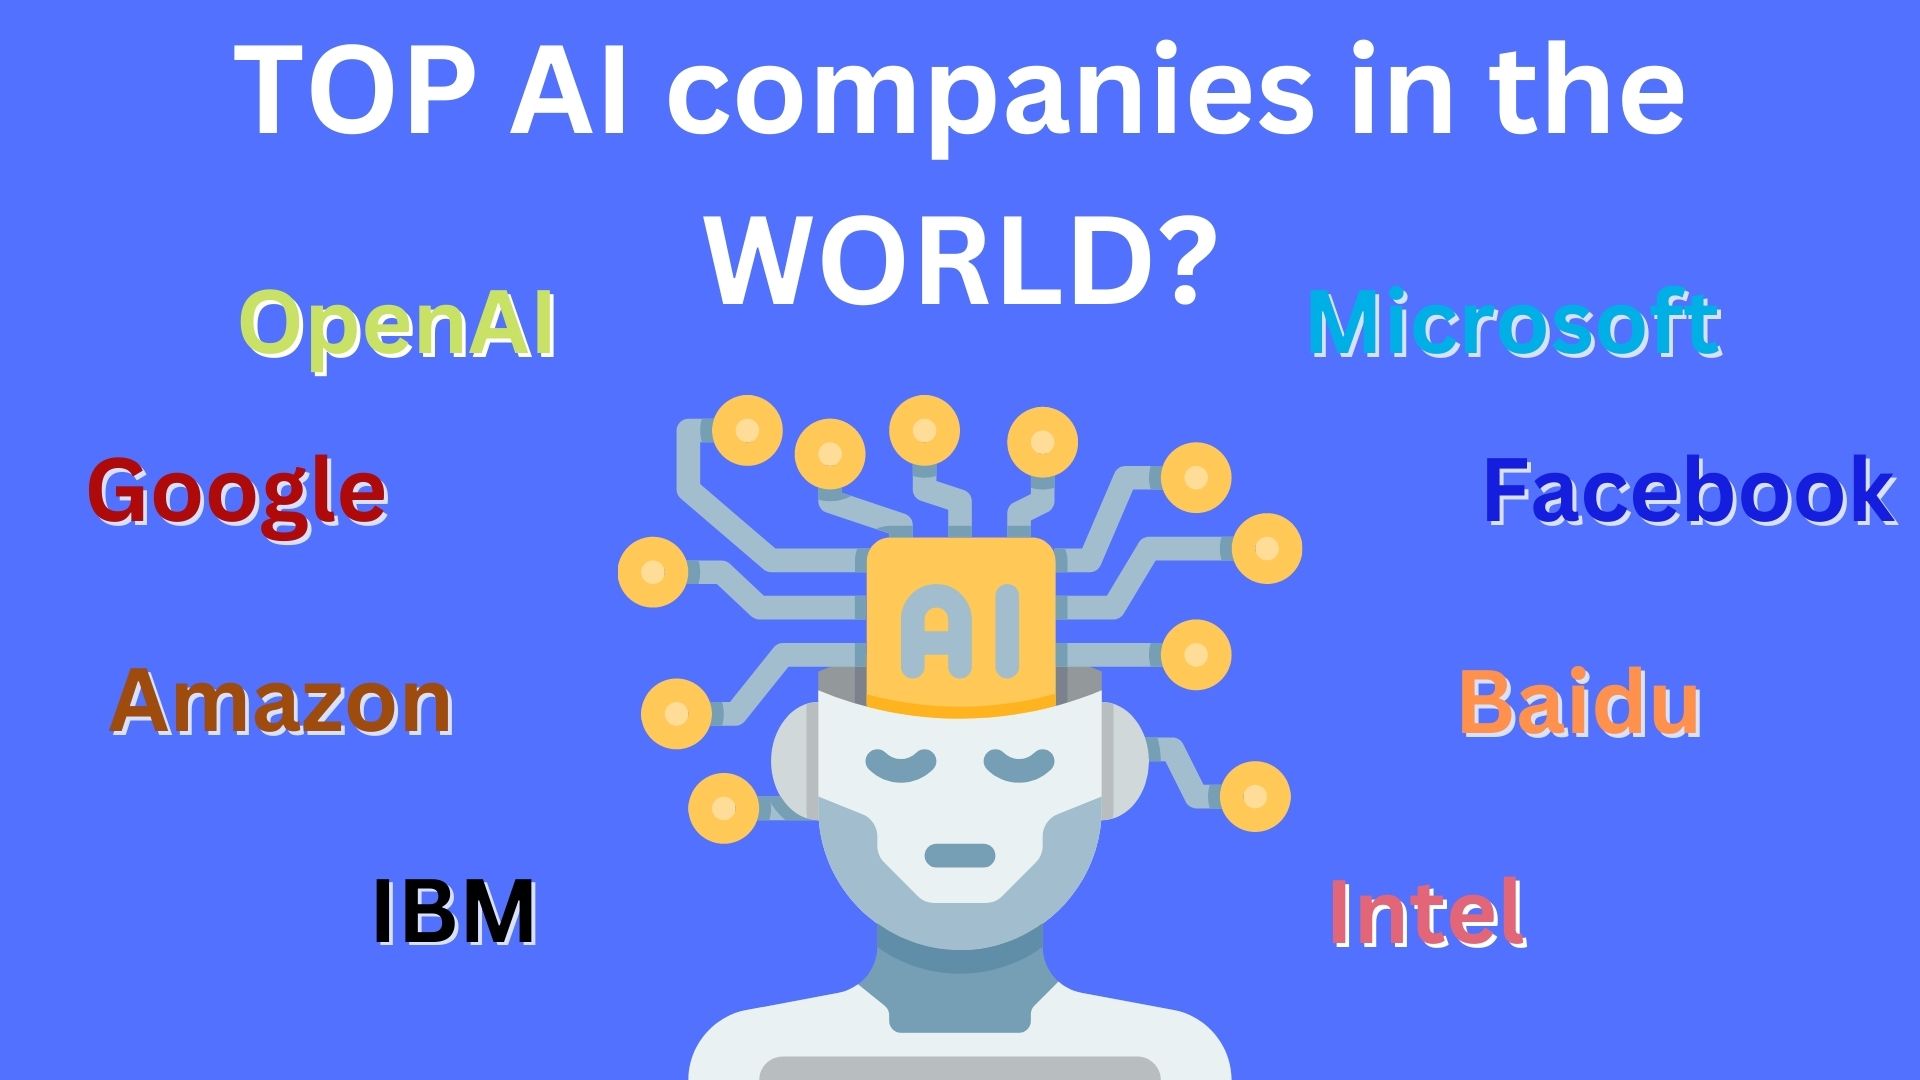 Name of the Top AI Companies in the World and their AI products